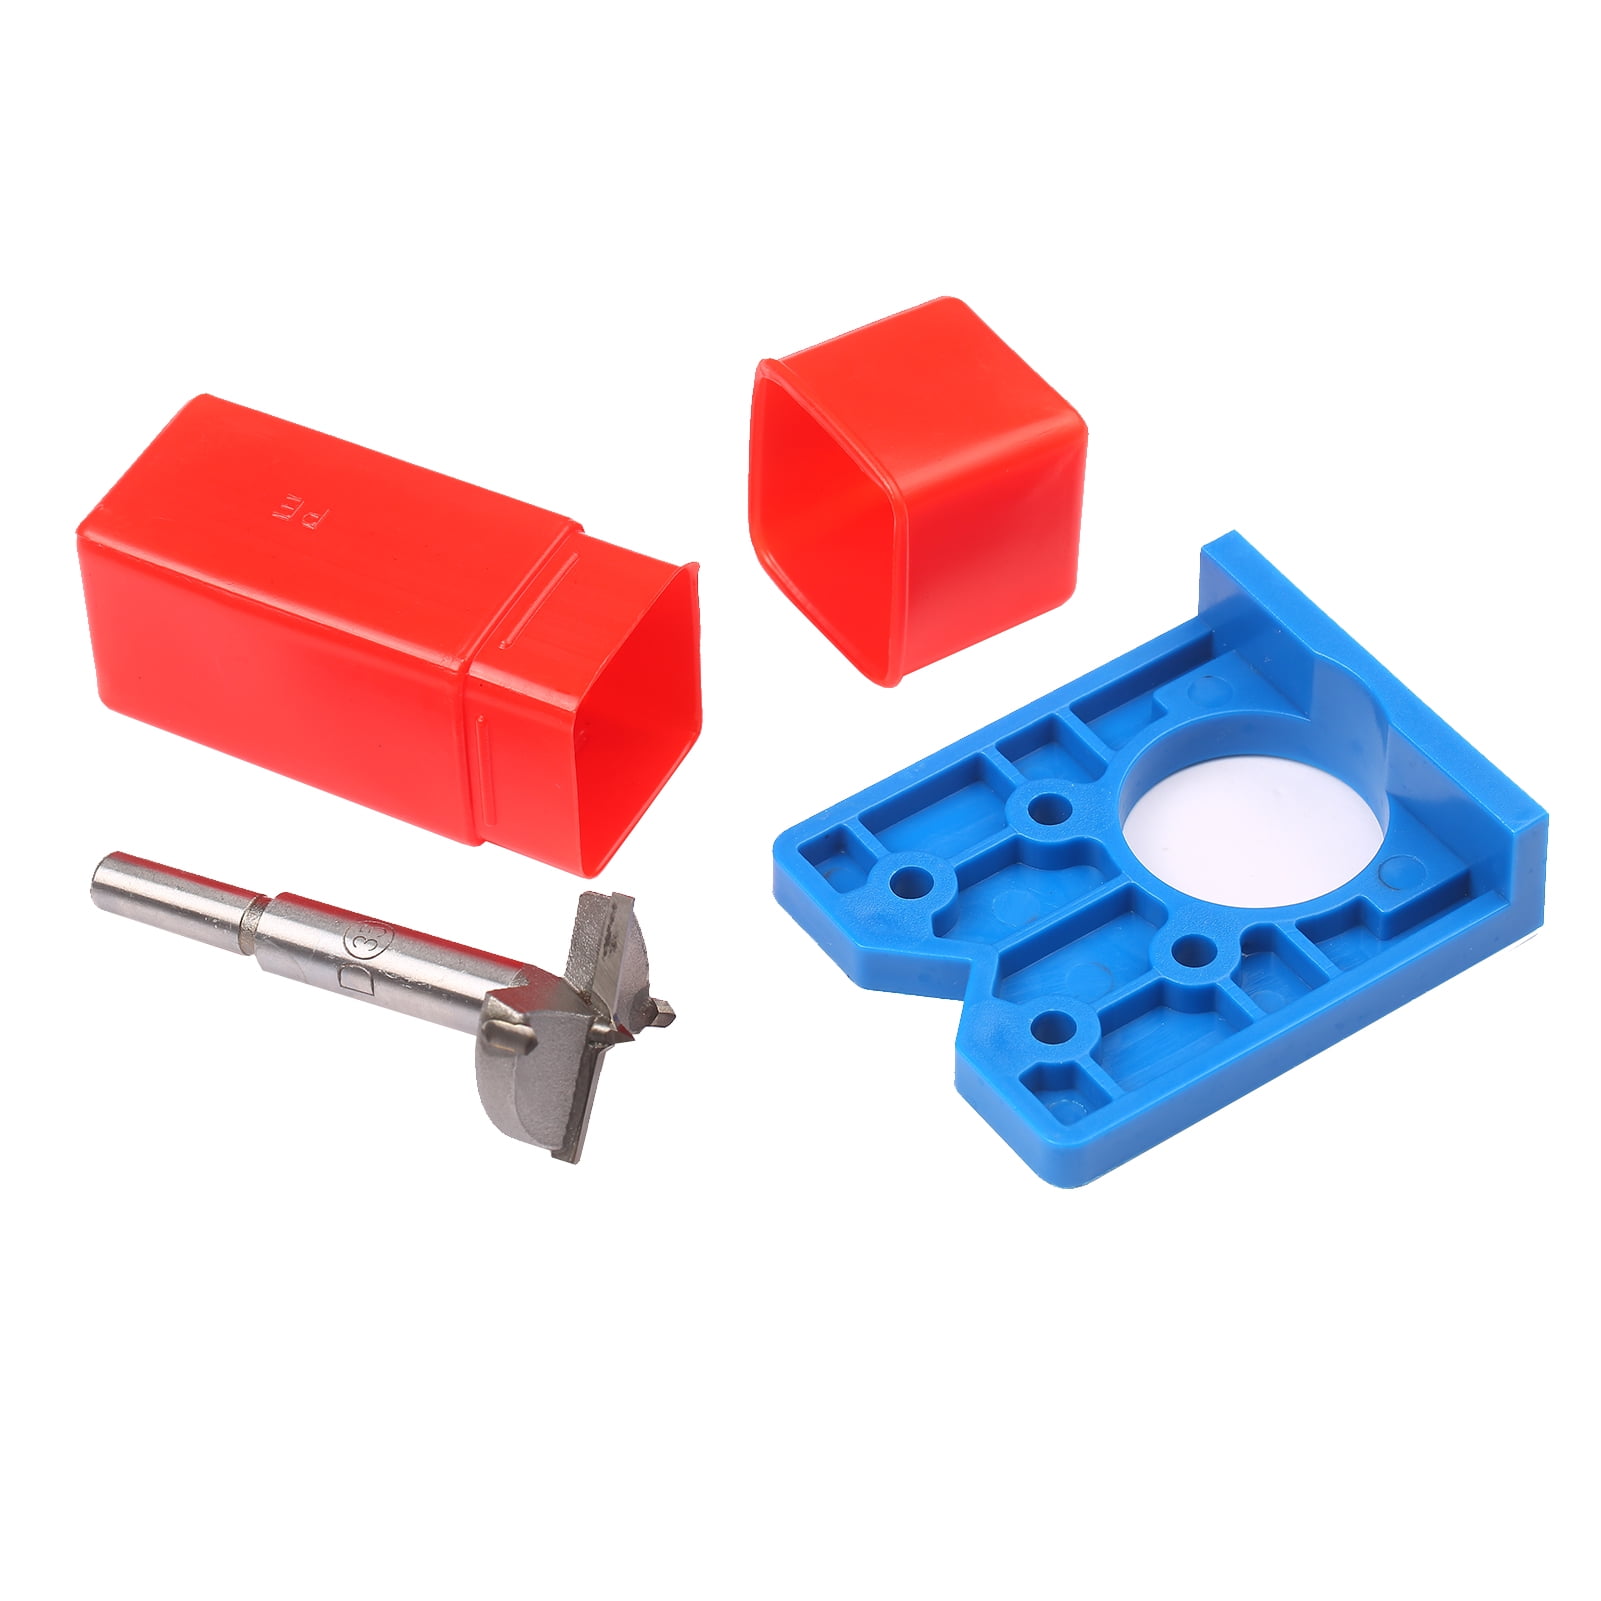 Red Drilling Guide Cutter Bit Set Easy Operation Accurate Positioning 35mm 